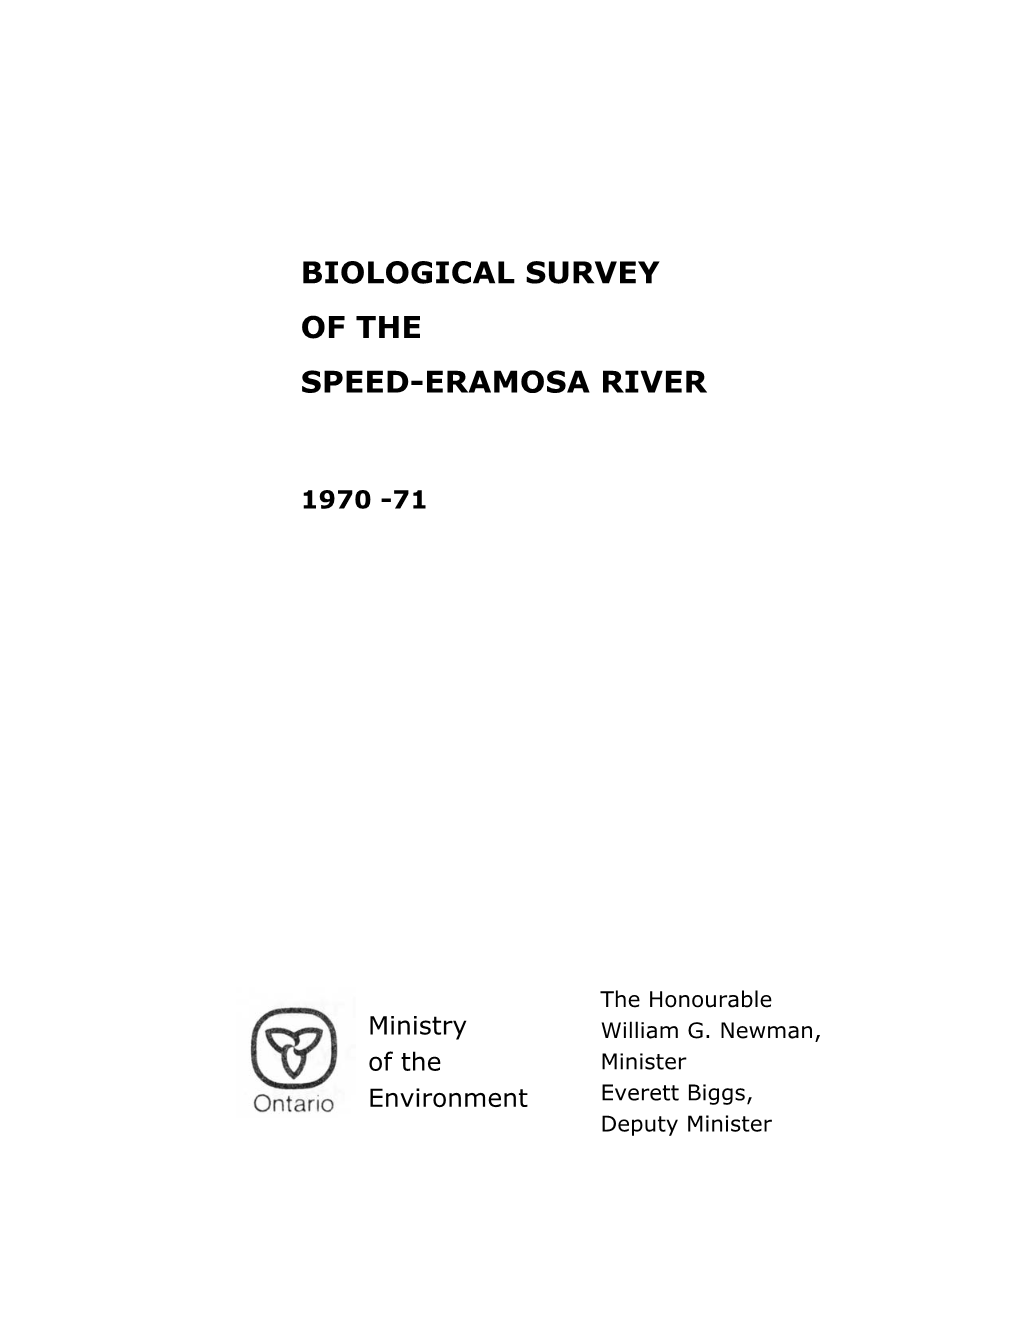 Biological Survey of the Speed-Eramosa River, 1970